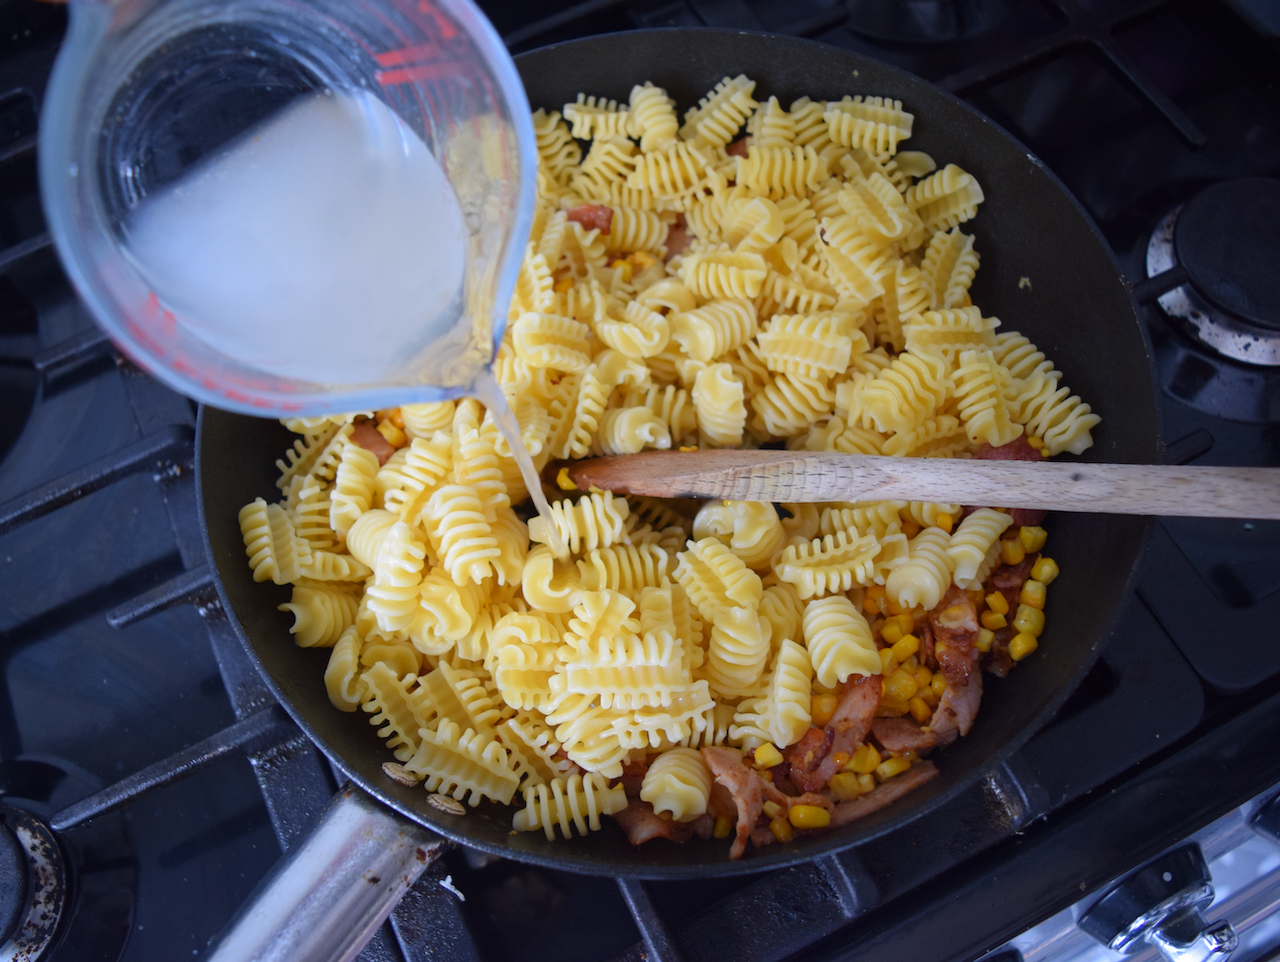 Parmesan, Corn and Bacon Pasta recipe from Lucy Loves Food Blog